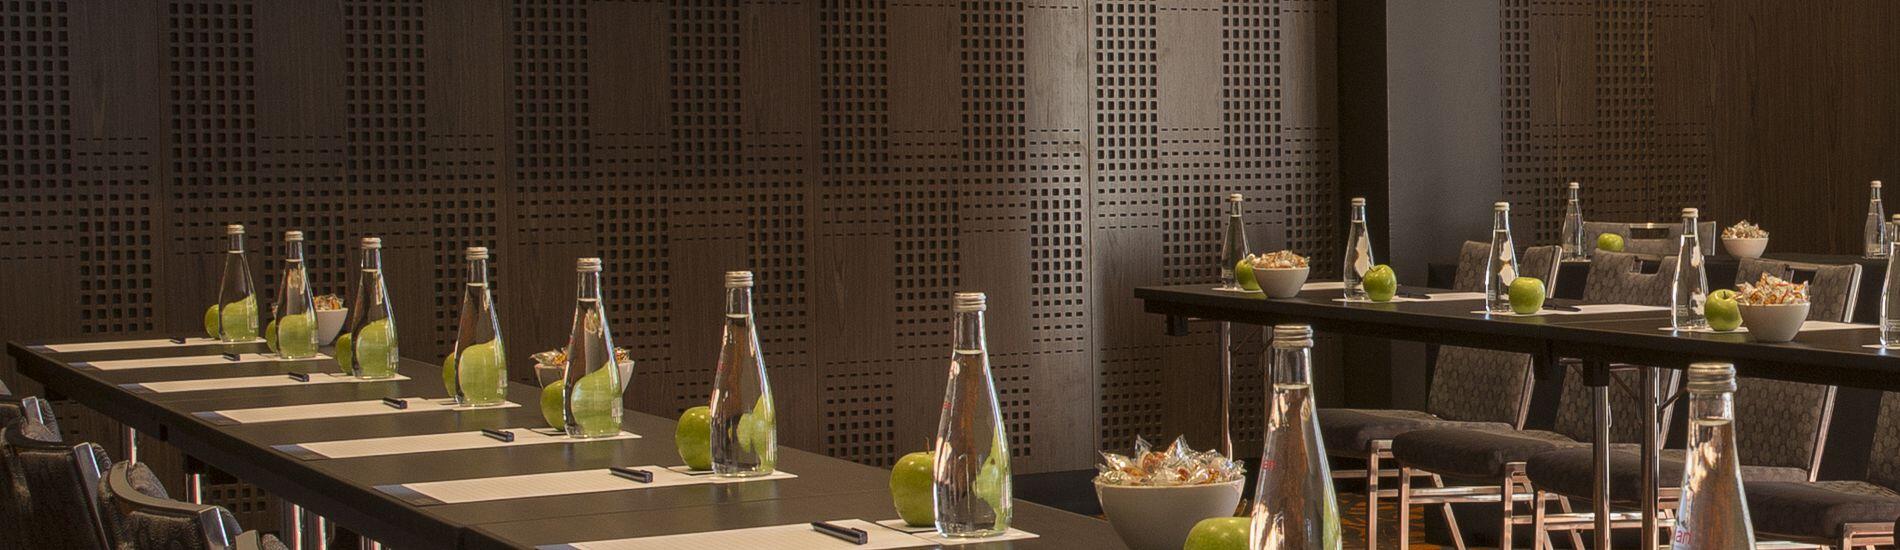 SUPACOUSTIC Custom Perforated Acoustic Wall Panels For Hotel Conference Facilty